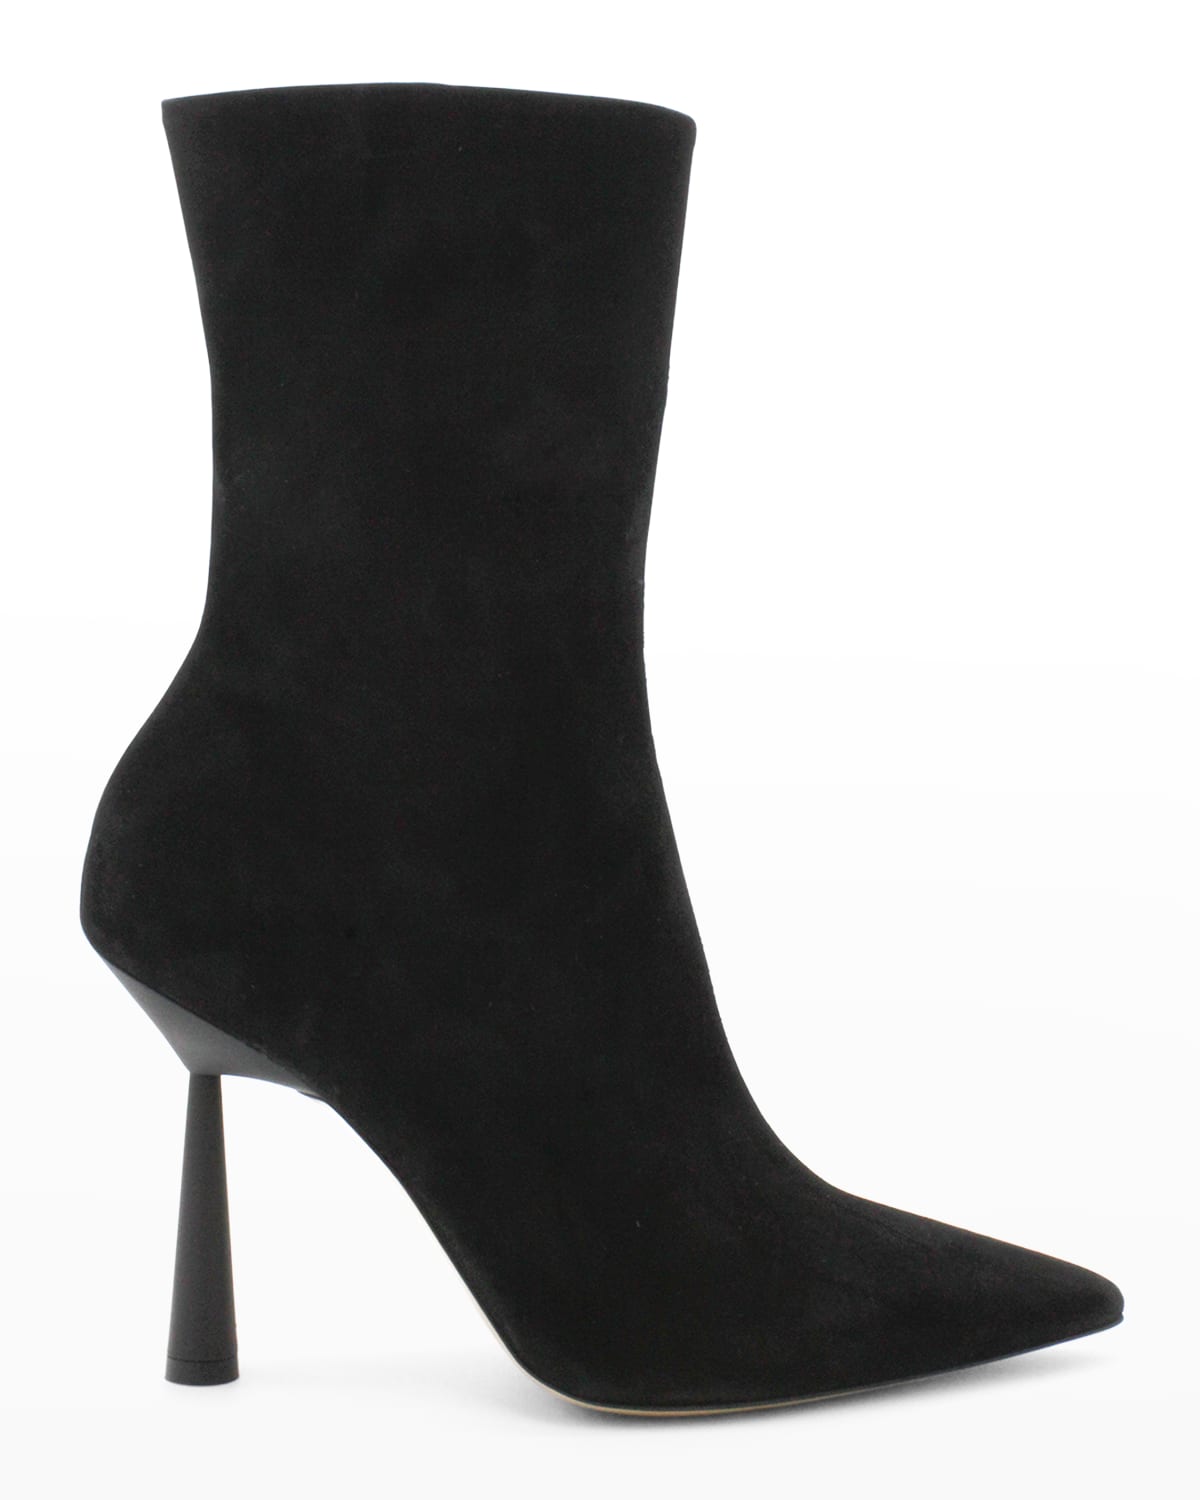 GIA/RHW Rosie Suede Ankle Booties